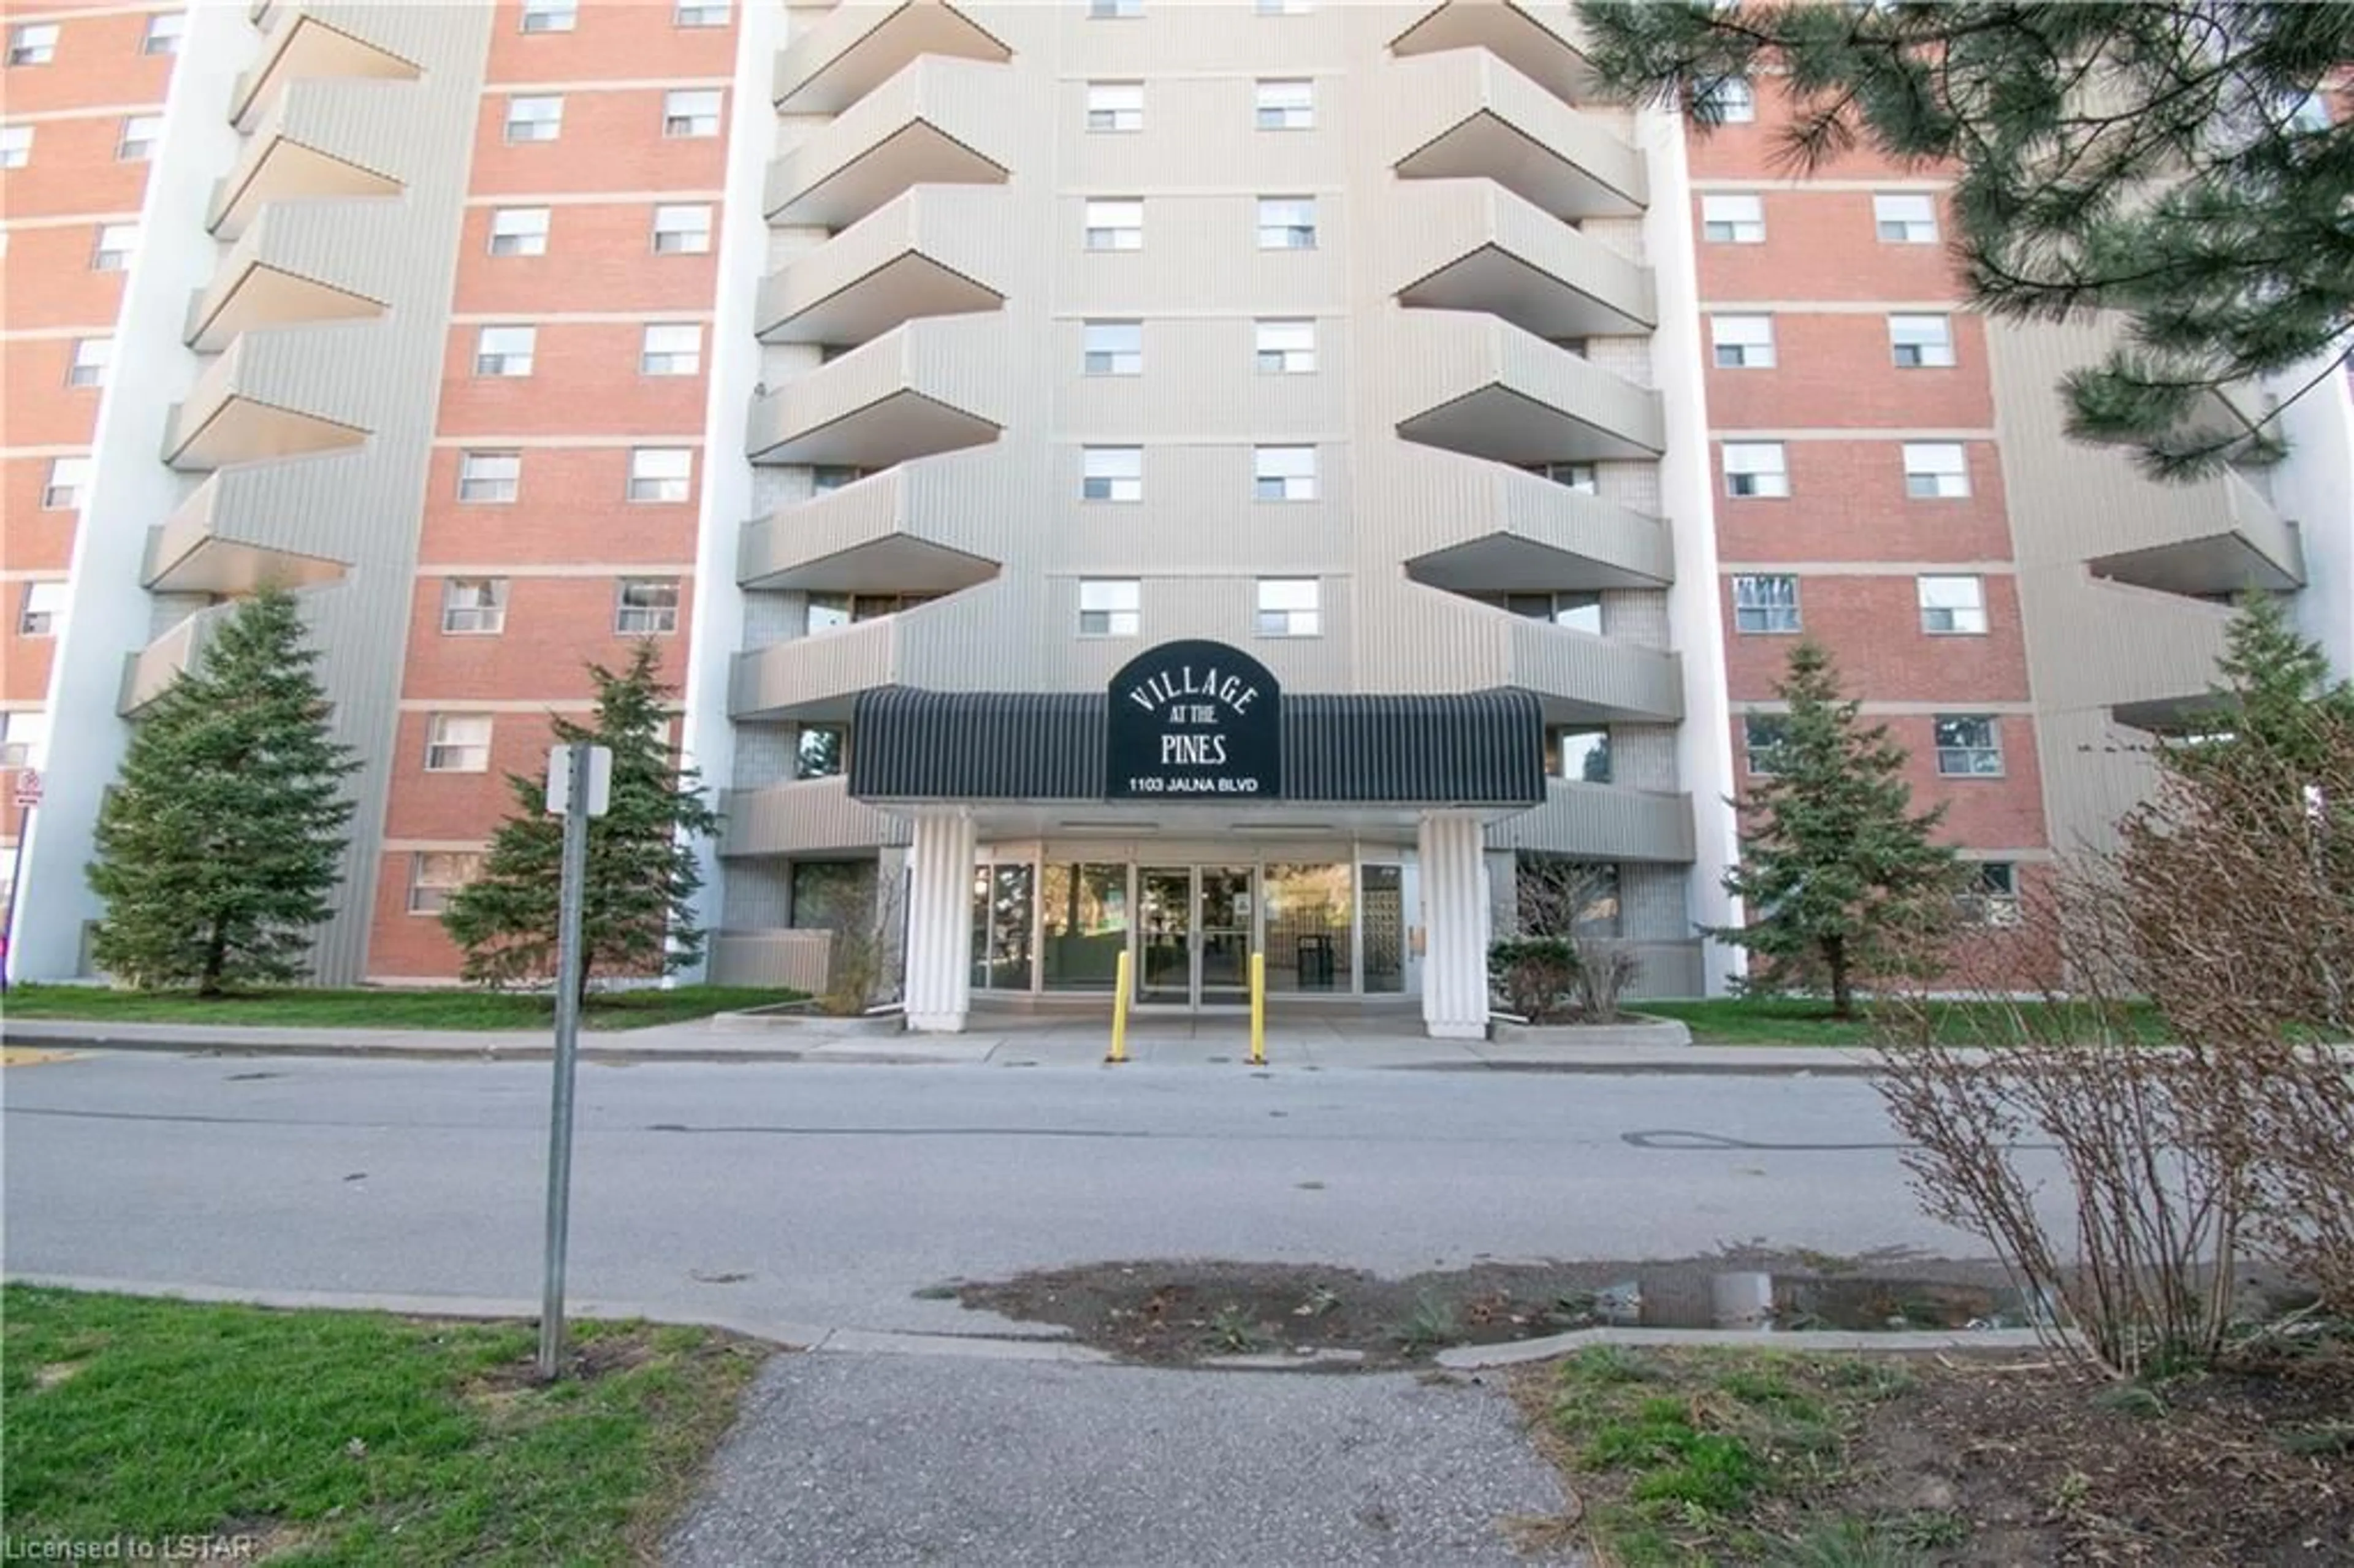 Outside view for 1103 Jalna Blvd #1407, London Ontario N6E 2W8